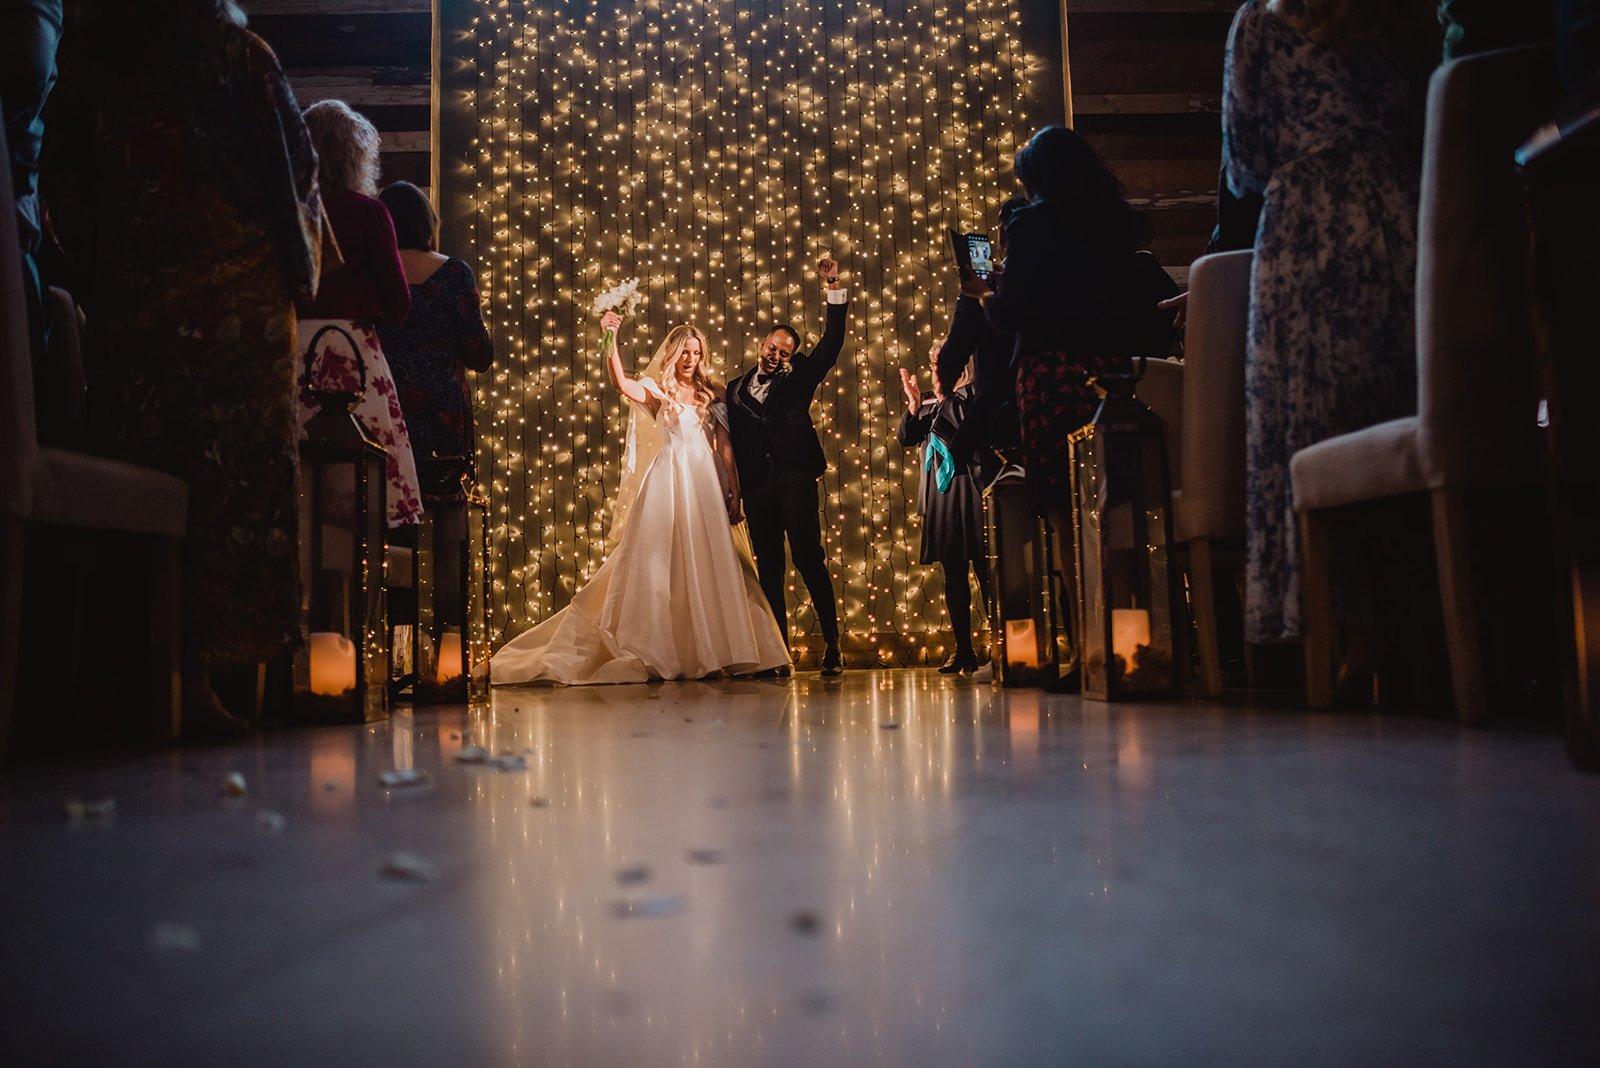 Bride and groom exiting the ceremony with a fairy light wall behind them